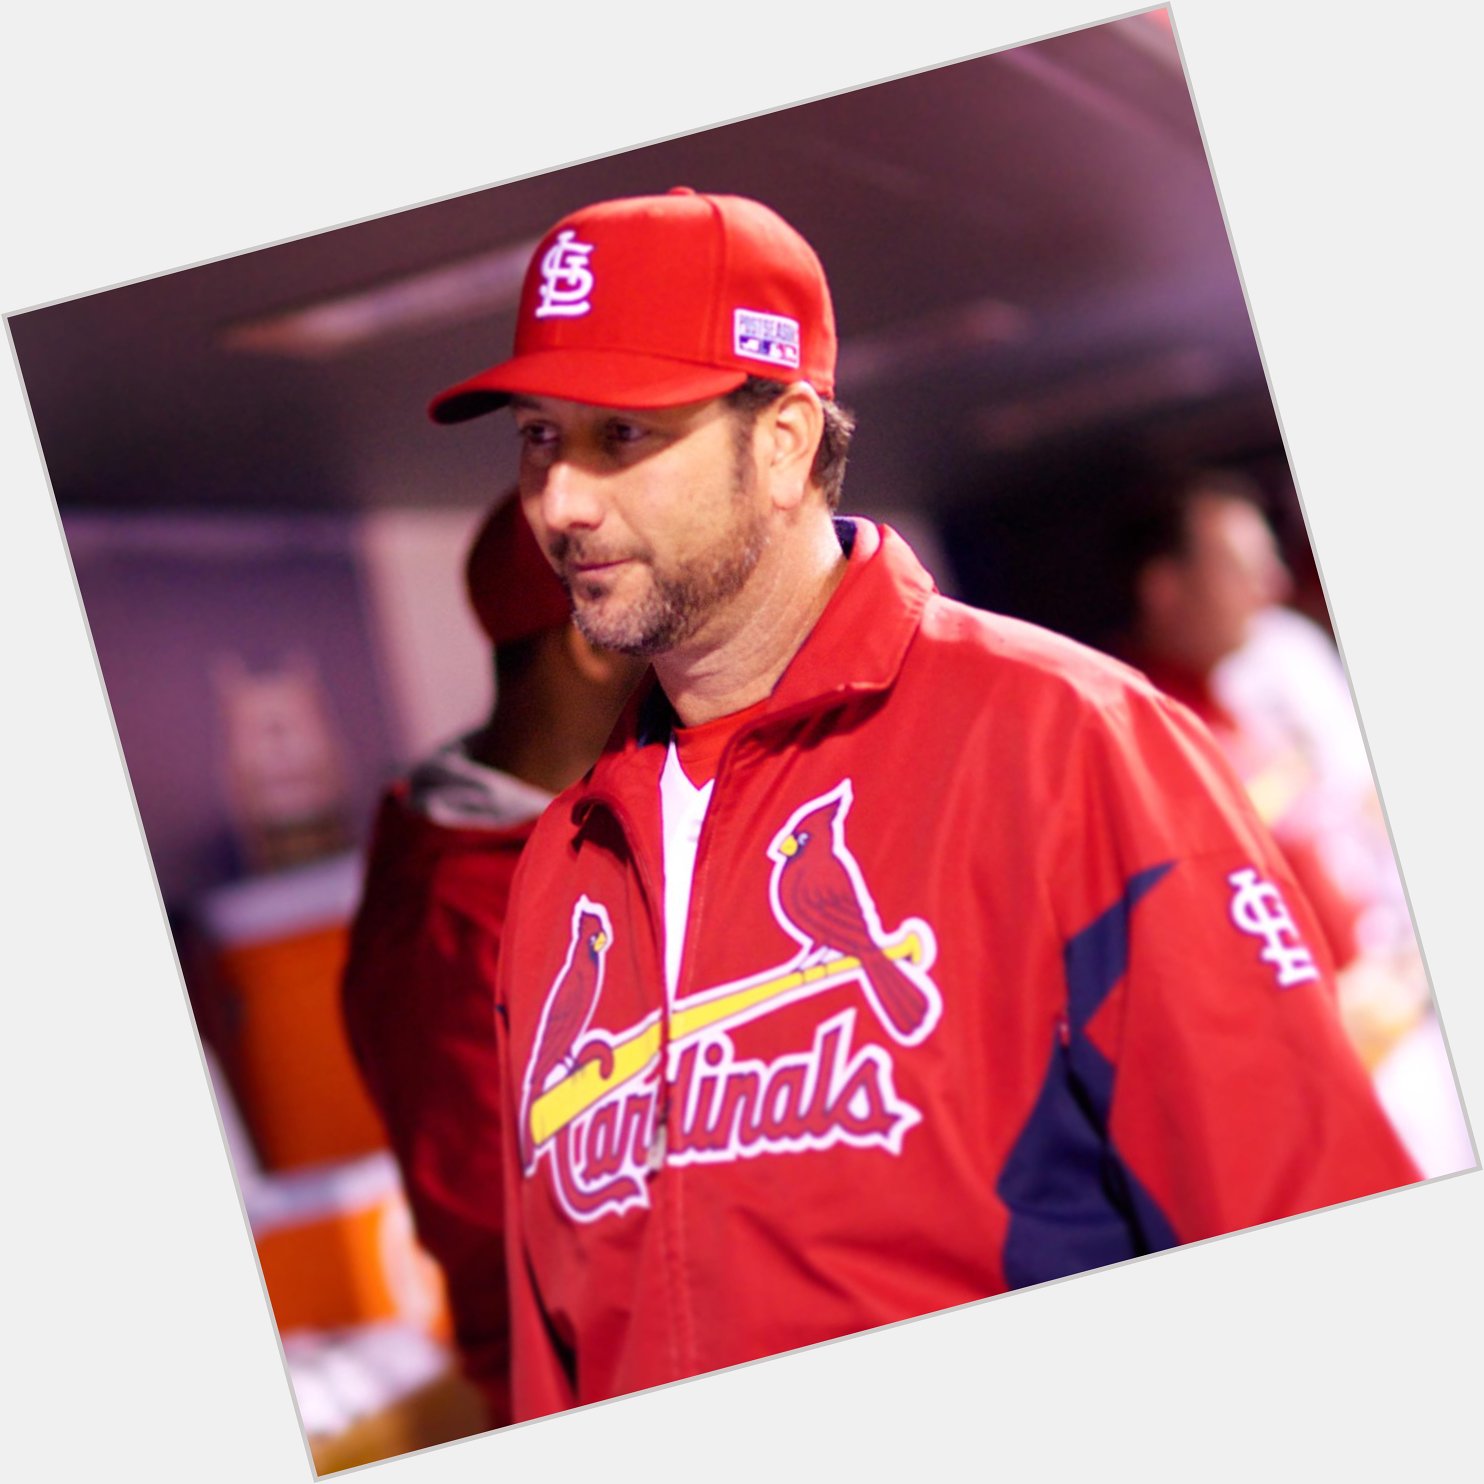 Join us in wishing a Happy Birthday to Cardinals Hitting Coach John Mabry! 